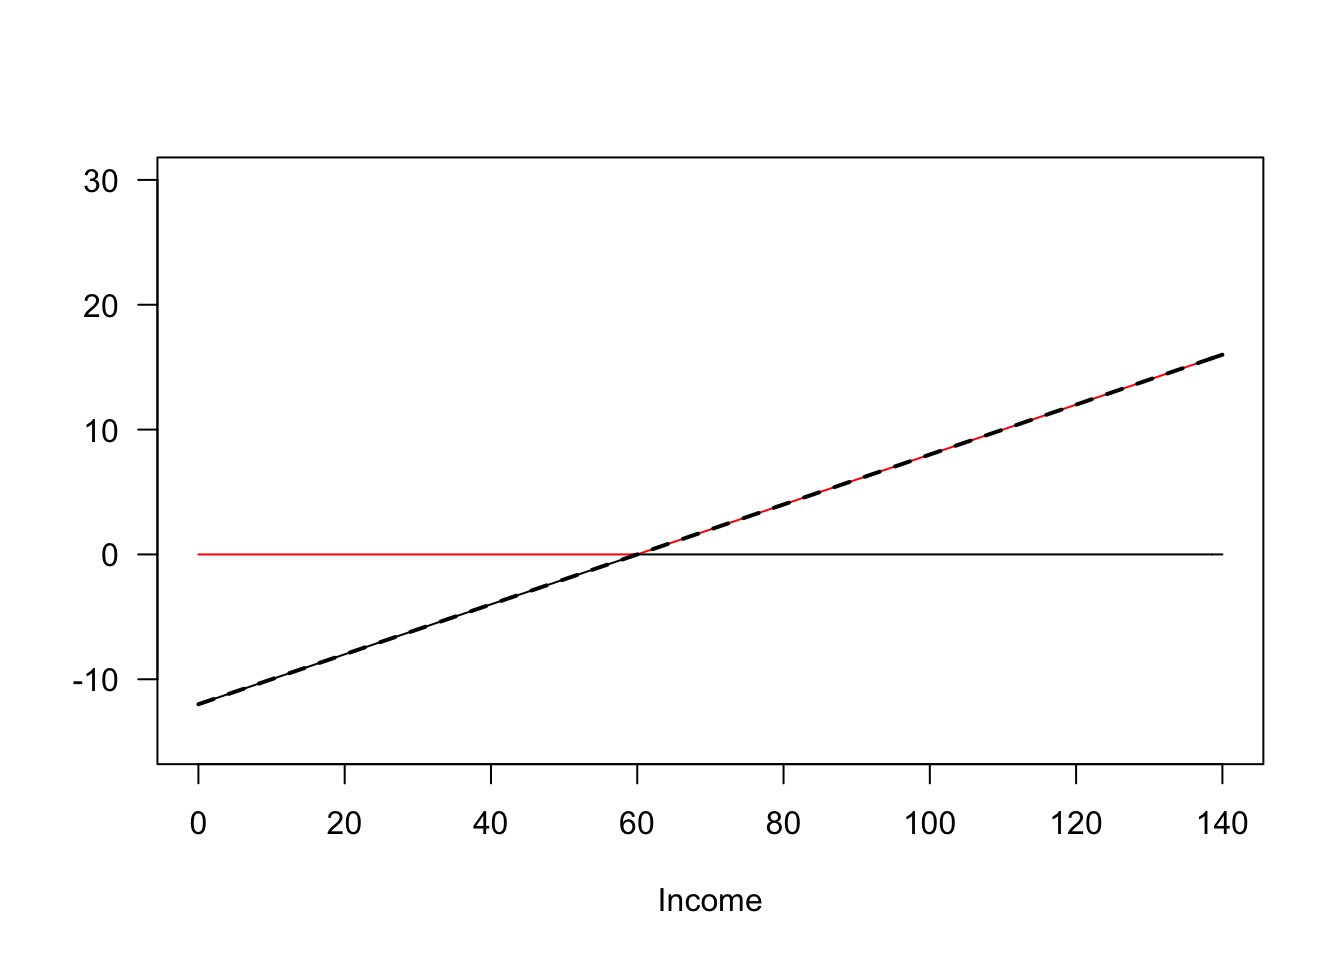 Two proposed policies. Taxes paid in red, benefits received in black. The policy on the left has universal benefits funded by a flat tax, while the one on the right has progressive taxes and benefits. However, the combined effect of the two policies (dashed lines) is identical.